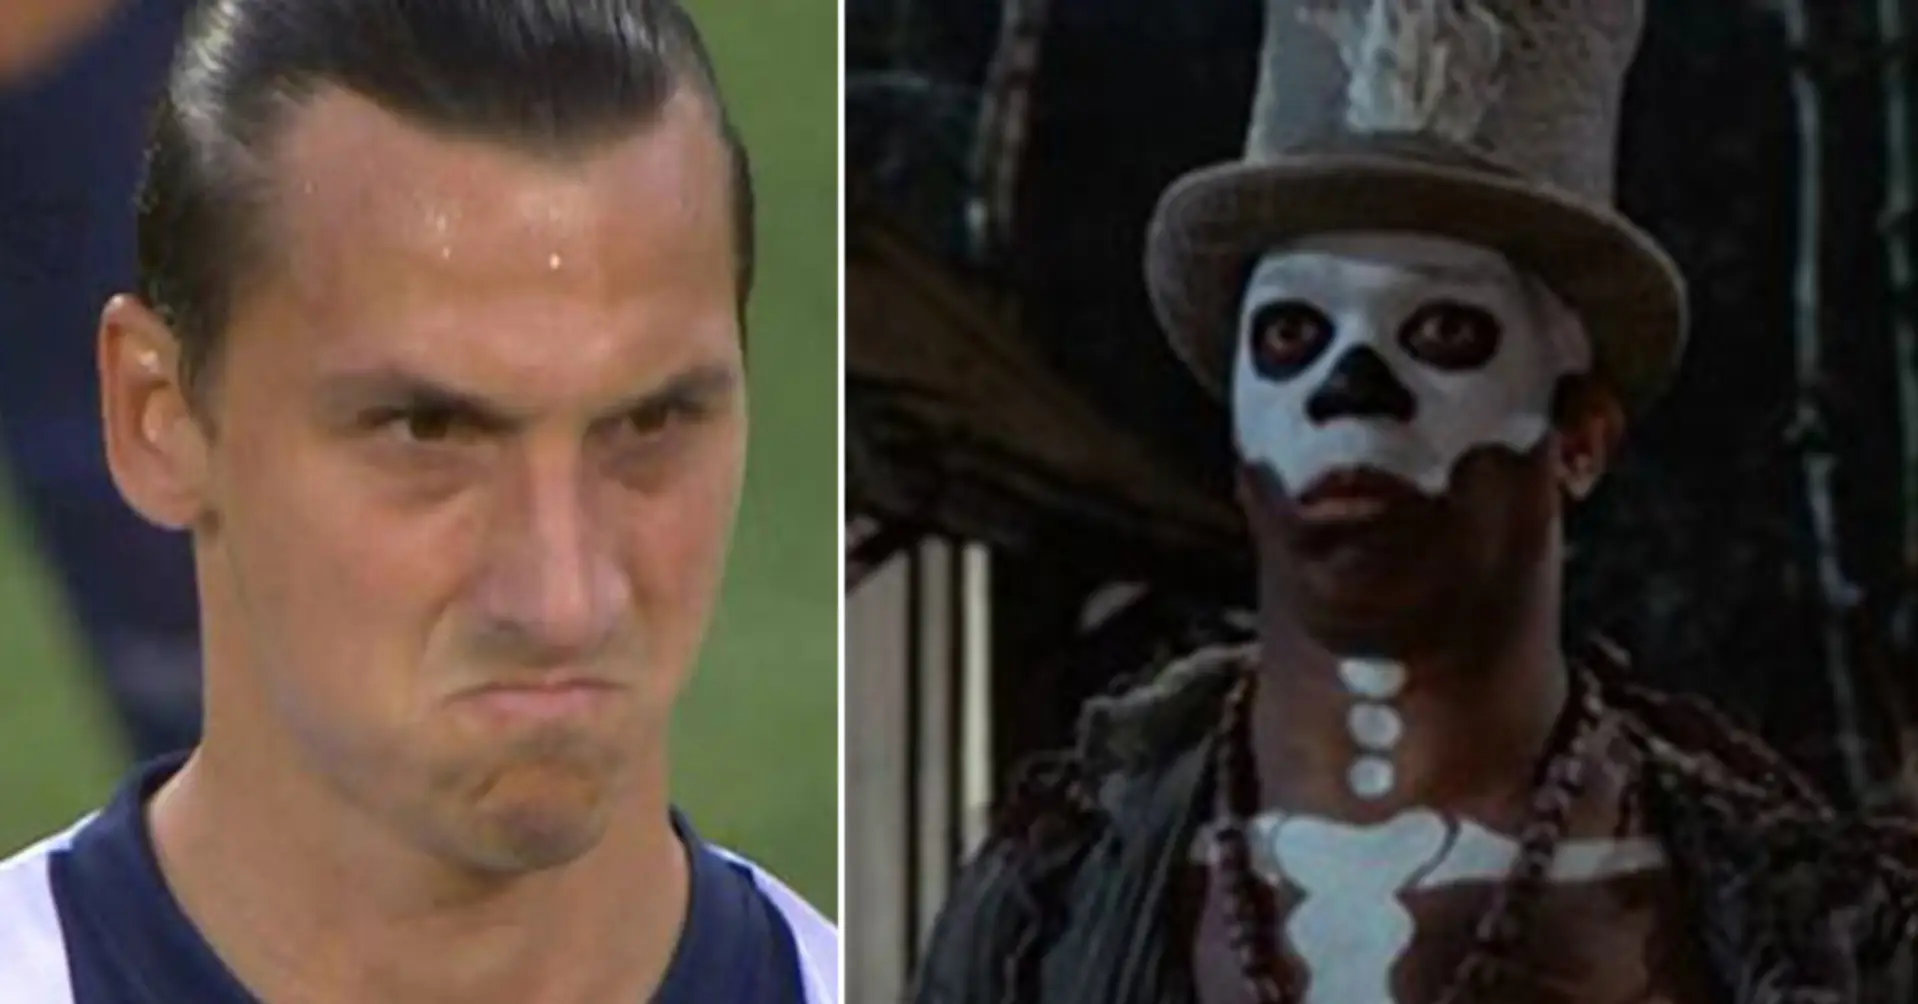 “Never ever say ‘voodoo s***’ in ordinary life”: notorious voodoo priest fires warning to Zlatan